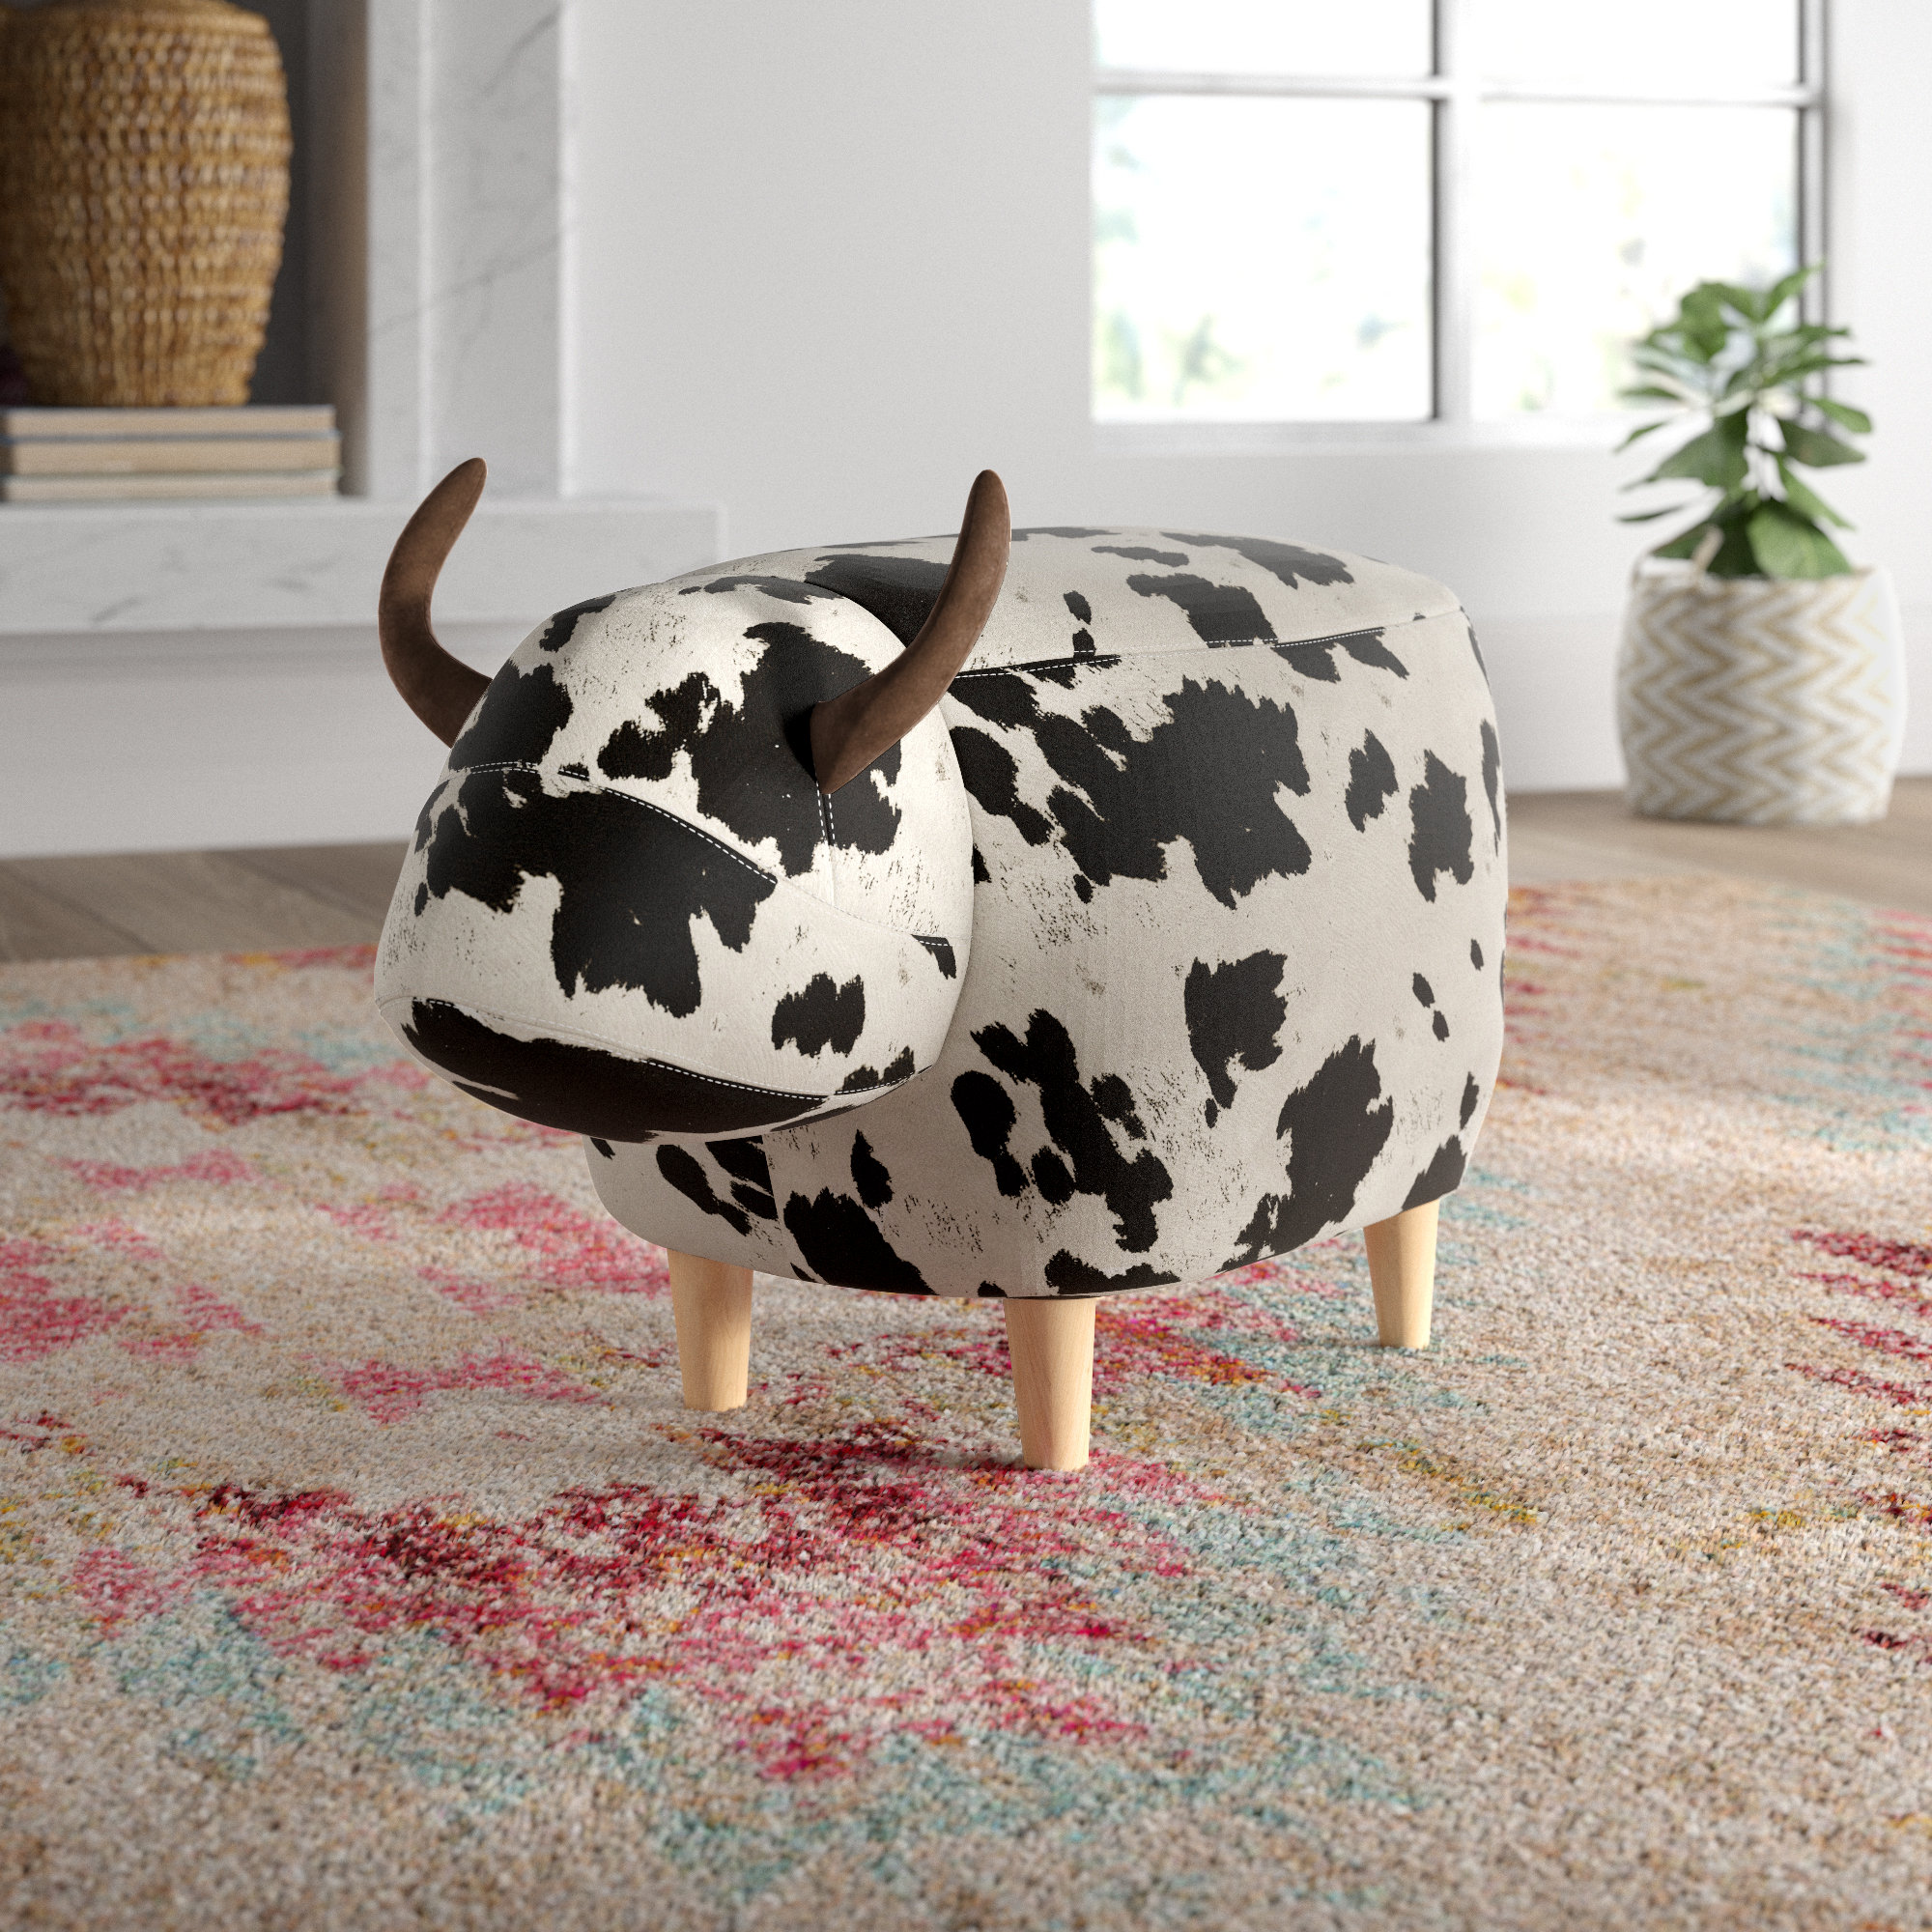 Home Decor Trends - Animal Print Lovers Part One — Sparrow & Plumb  Furniture, Ottomans and Footstools